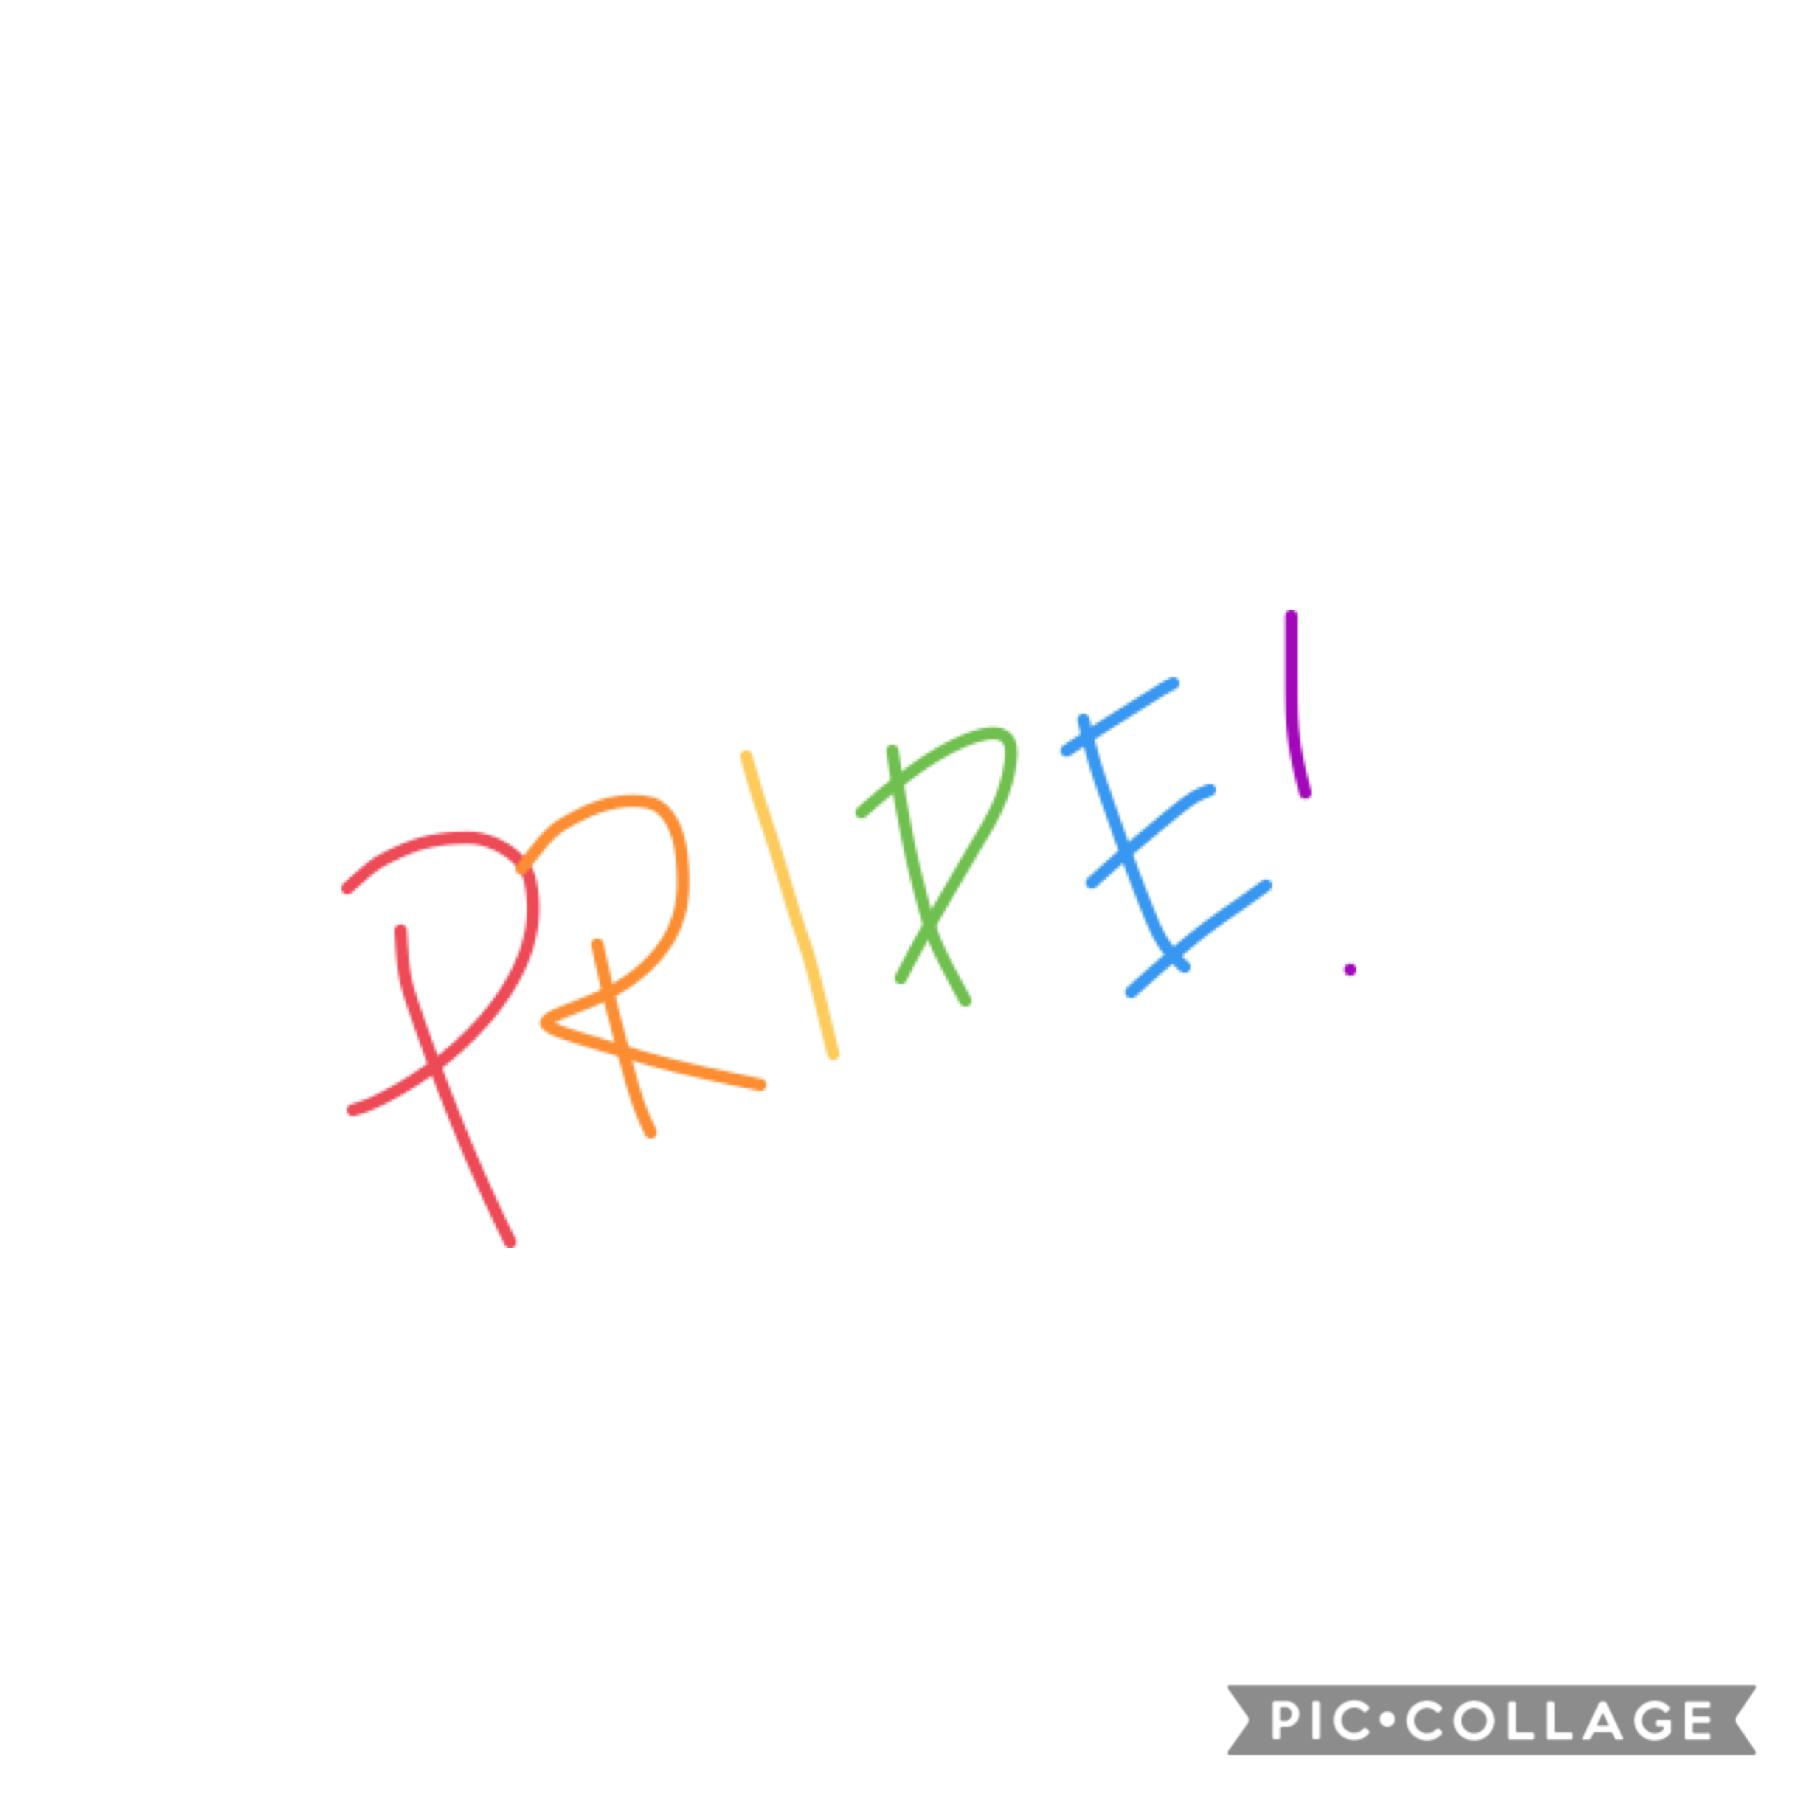 Happy Pride Month!!

Might come out to my family but I’m not sure yet
